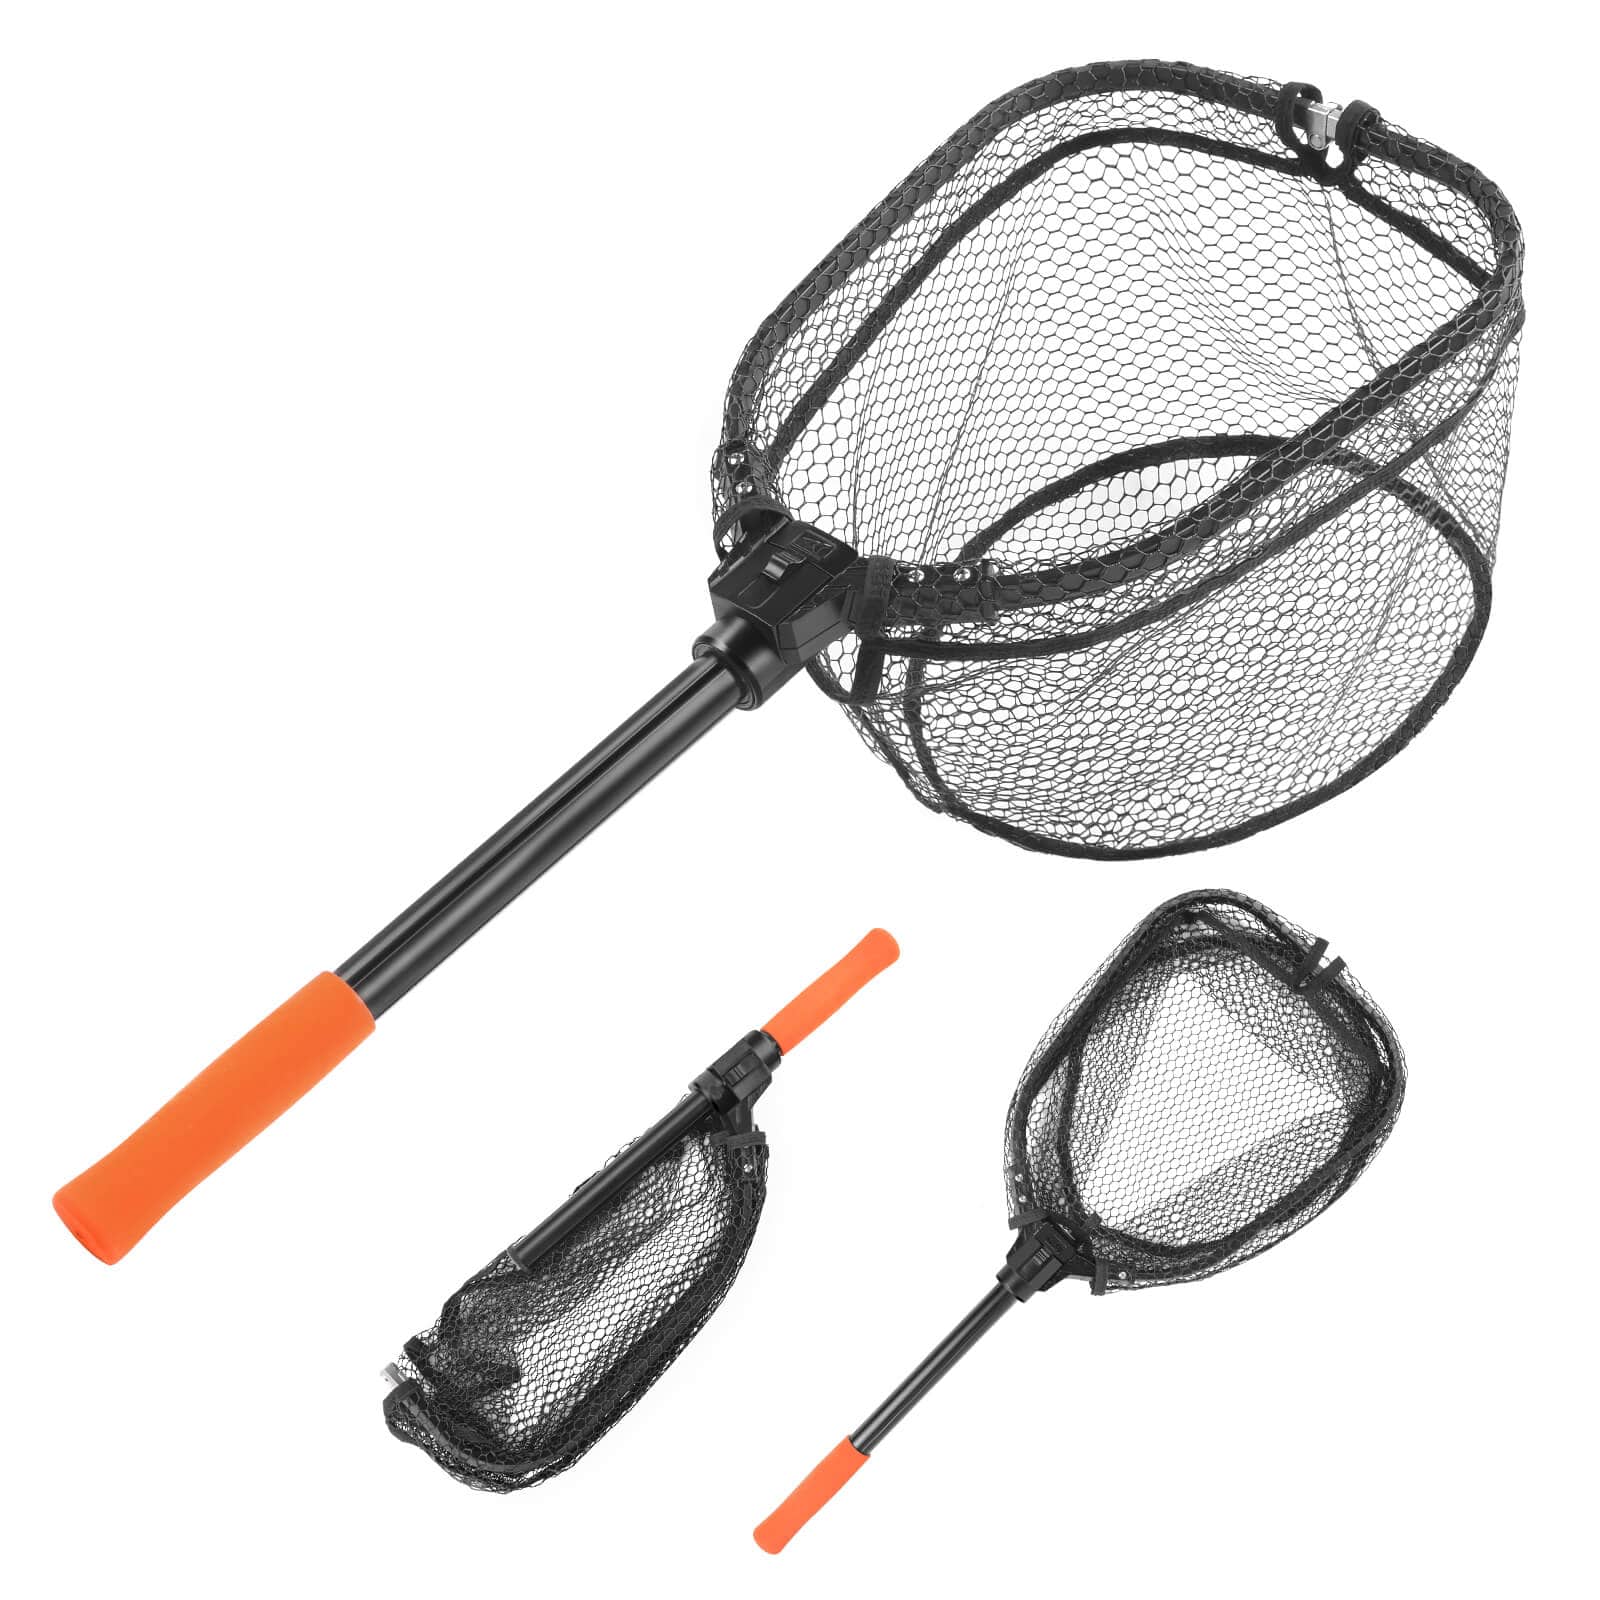  sikiwind Replacement Collapsible Fishing Nets Rubber